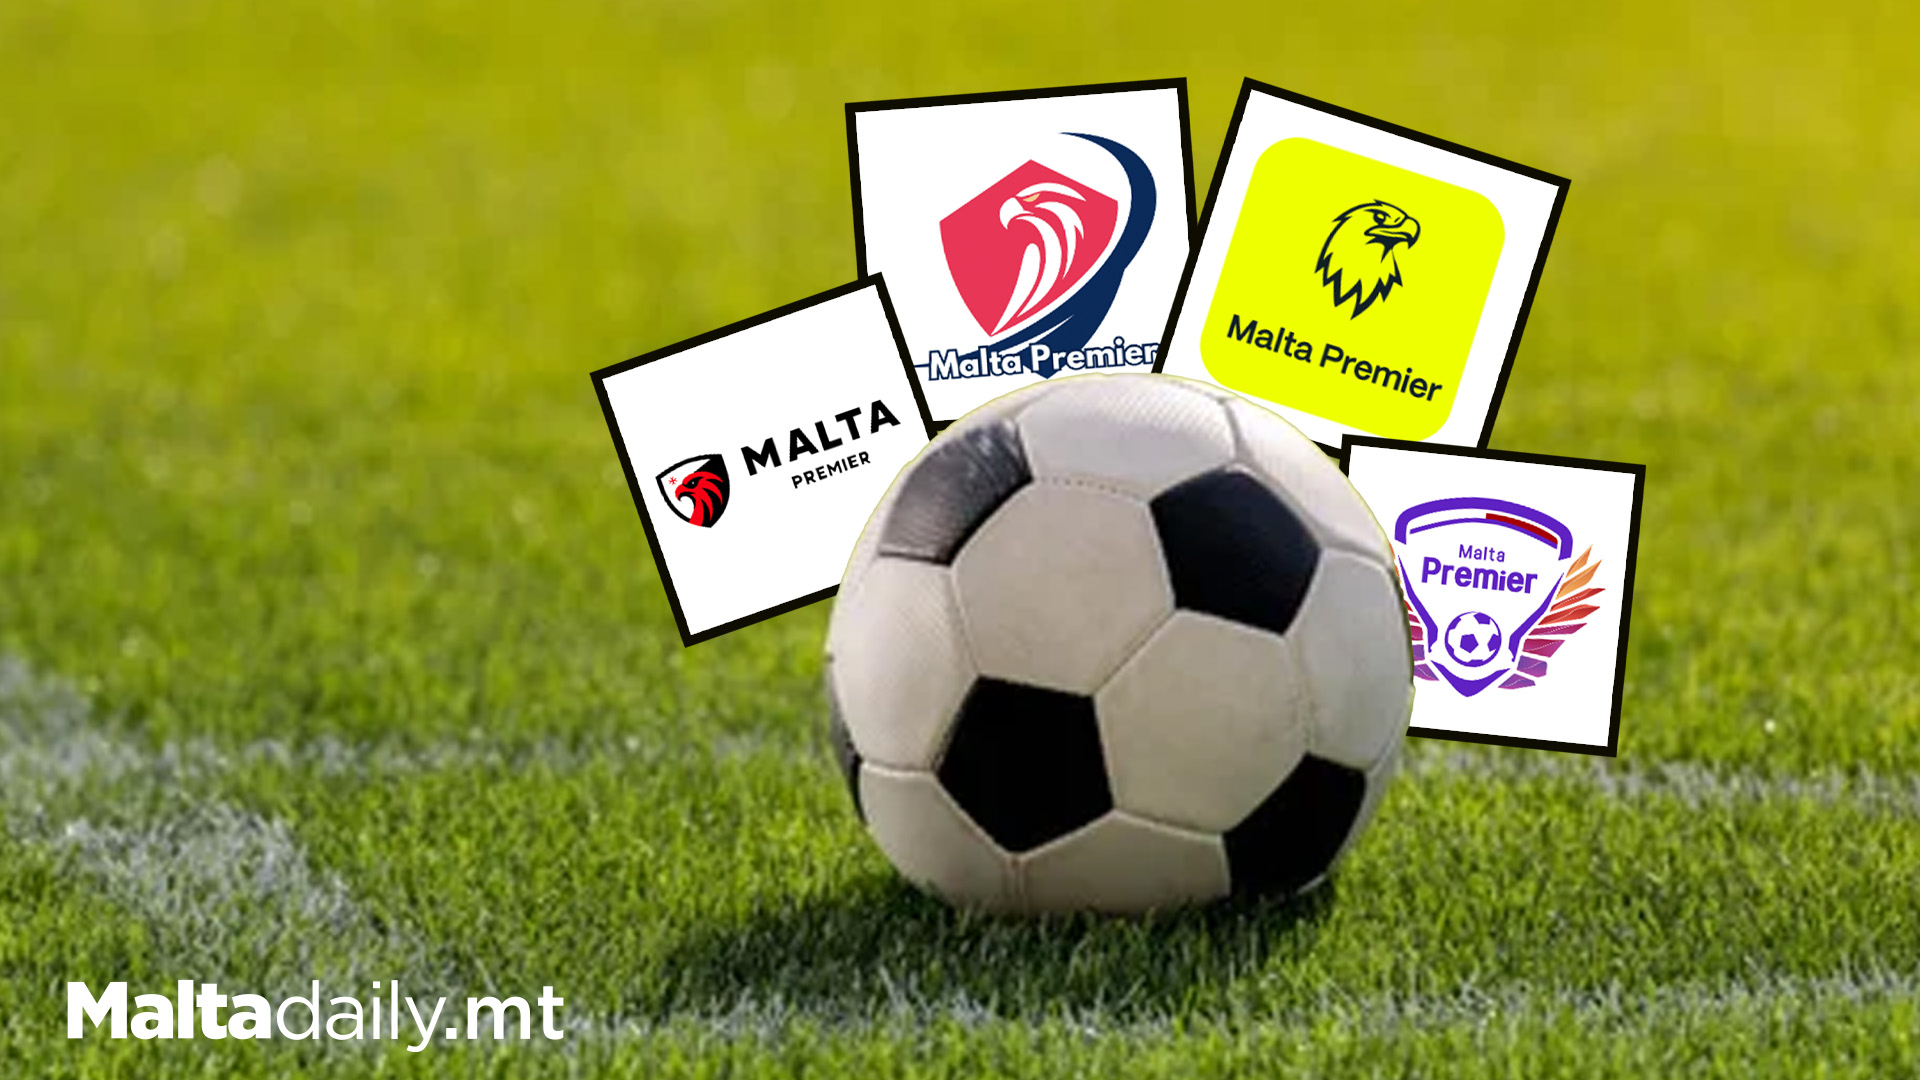 You Can Now Vote For The Best Malta Premier Logo